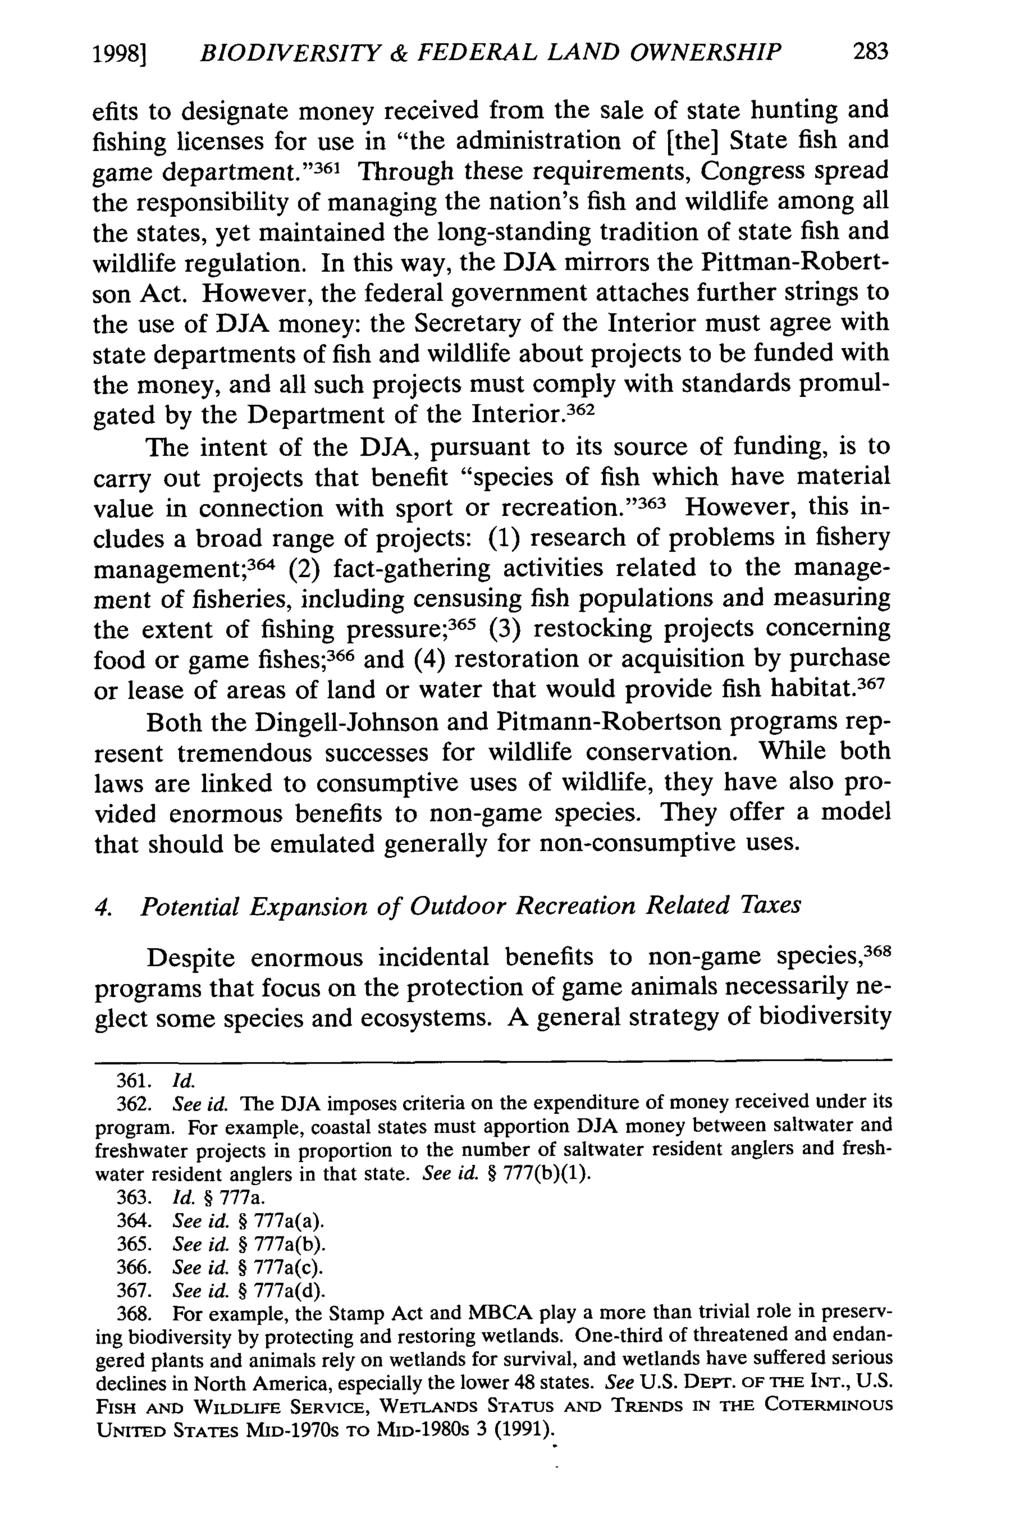 19981 BIODIVERSITY & FEDERAL LAND OWNERSHIP 283 efits to designate money received from the sale of state hunting and fishing licenses for use in "the administration of [the] State fish and game